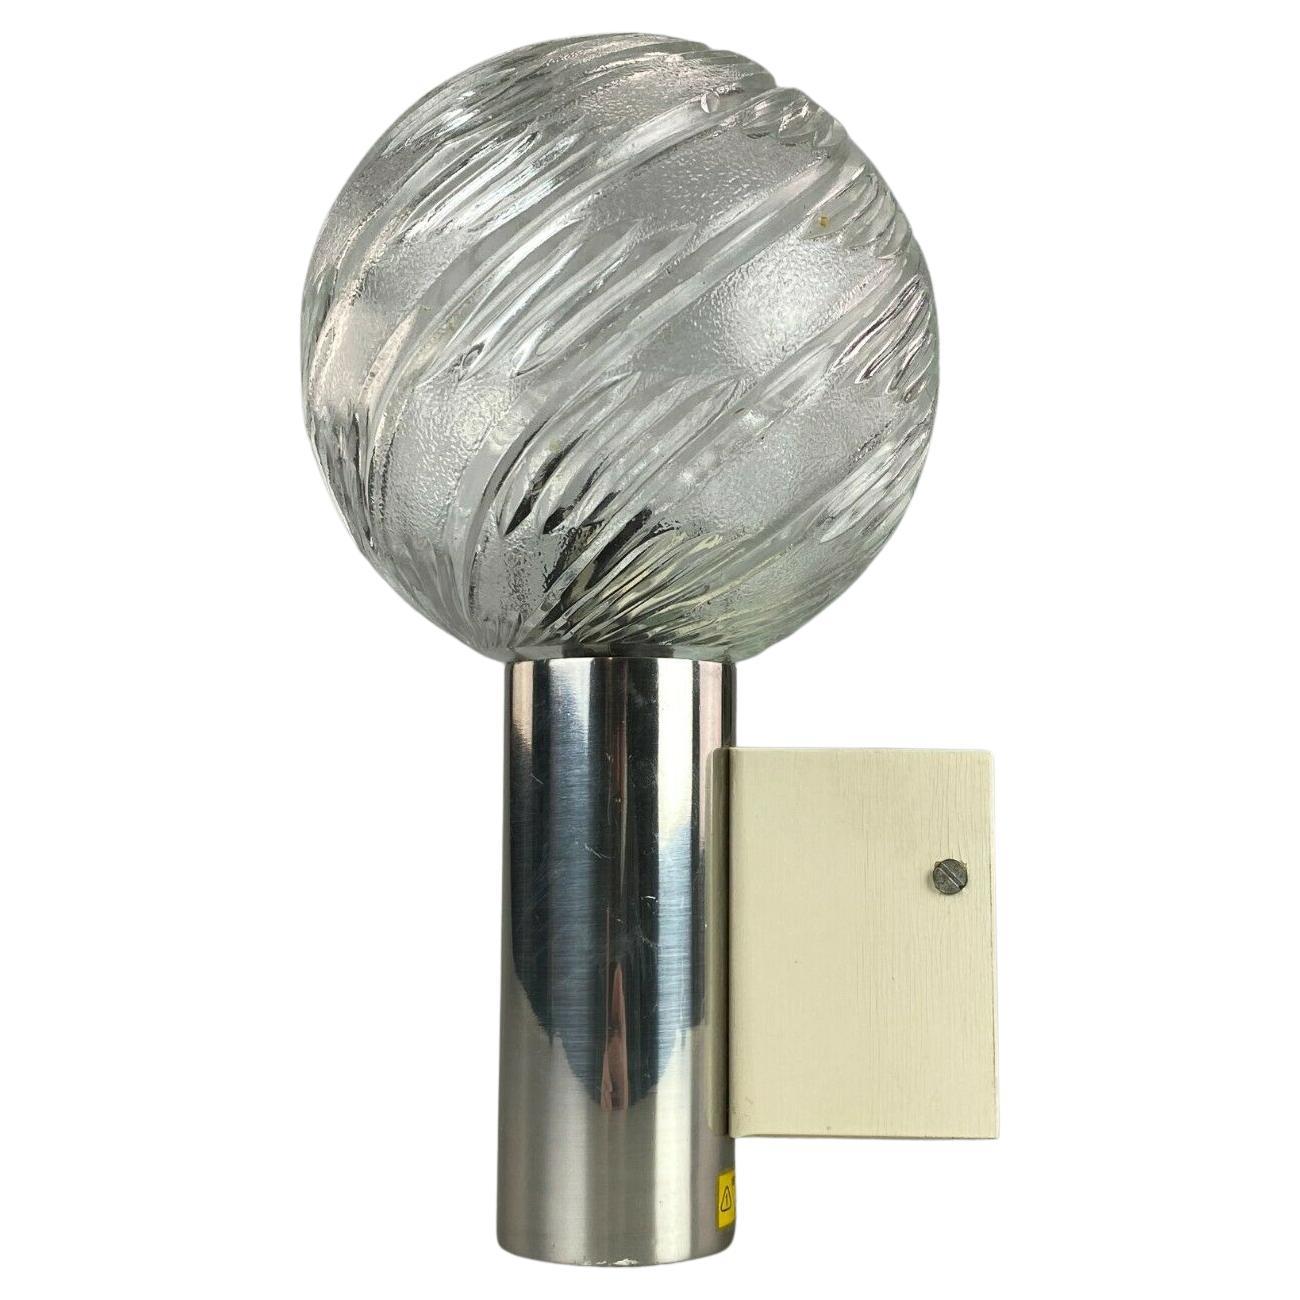 60s 70s Wall Lamp Ball Lamp Lamp Light Space Age Design For Sale